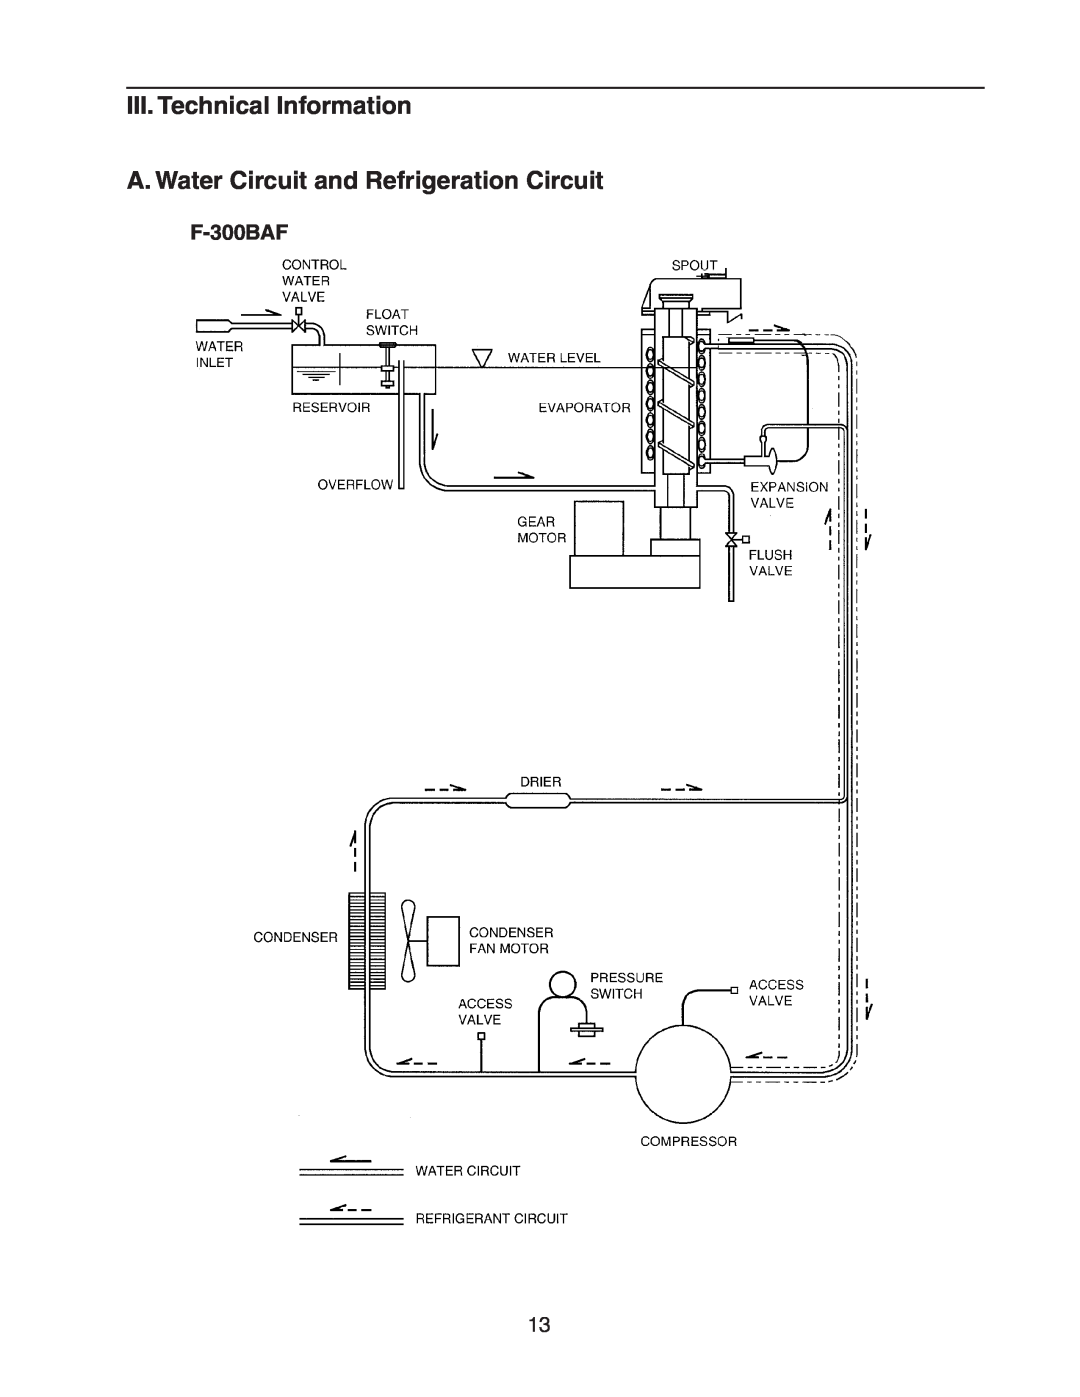 Hoshizaki F-300BAF service manual III. Technical Information A. Water Circuit and Refrigeration Circuit 